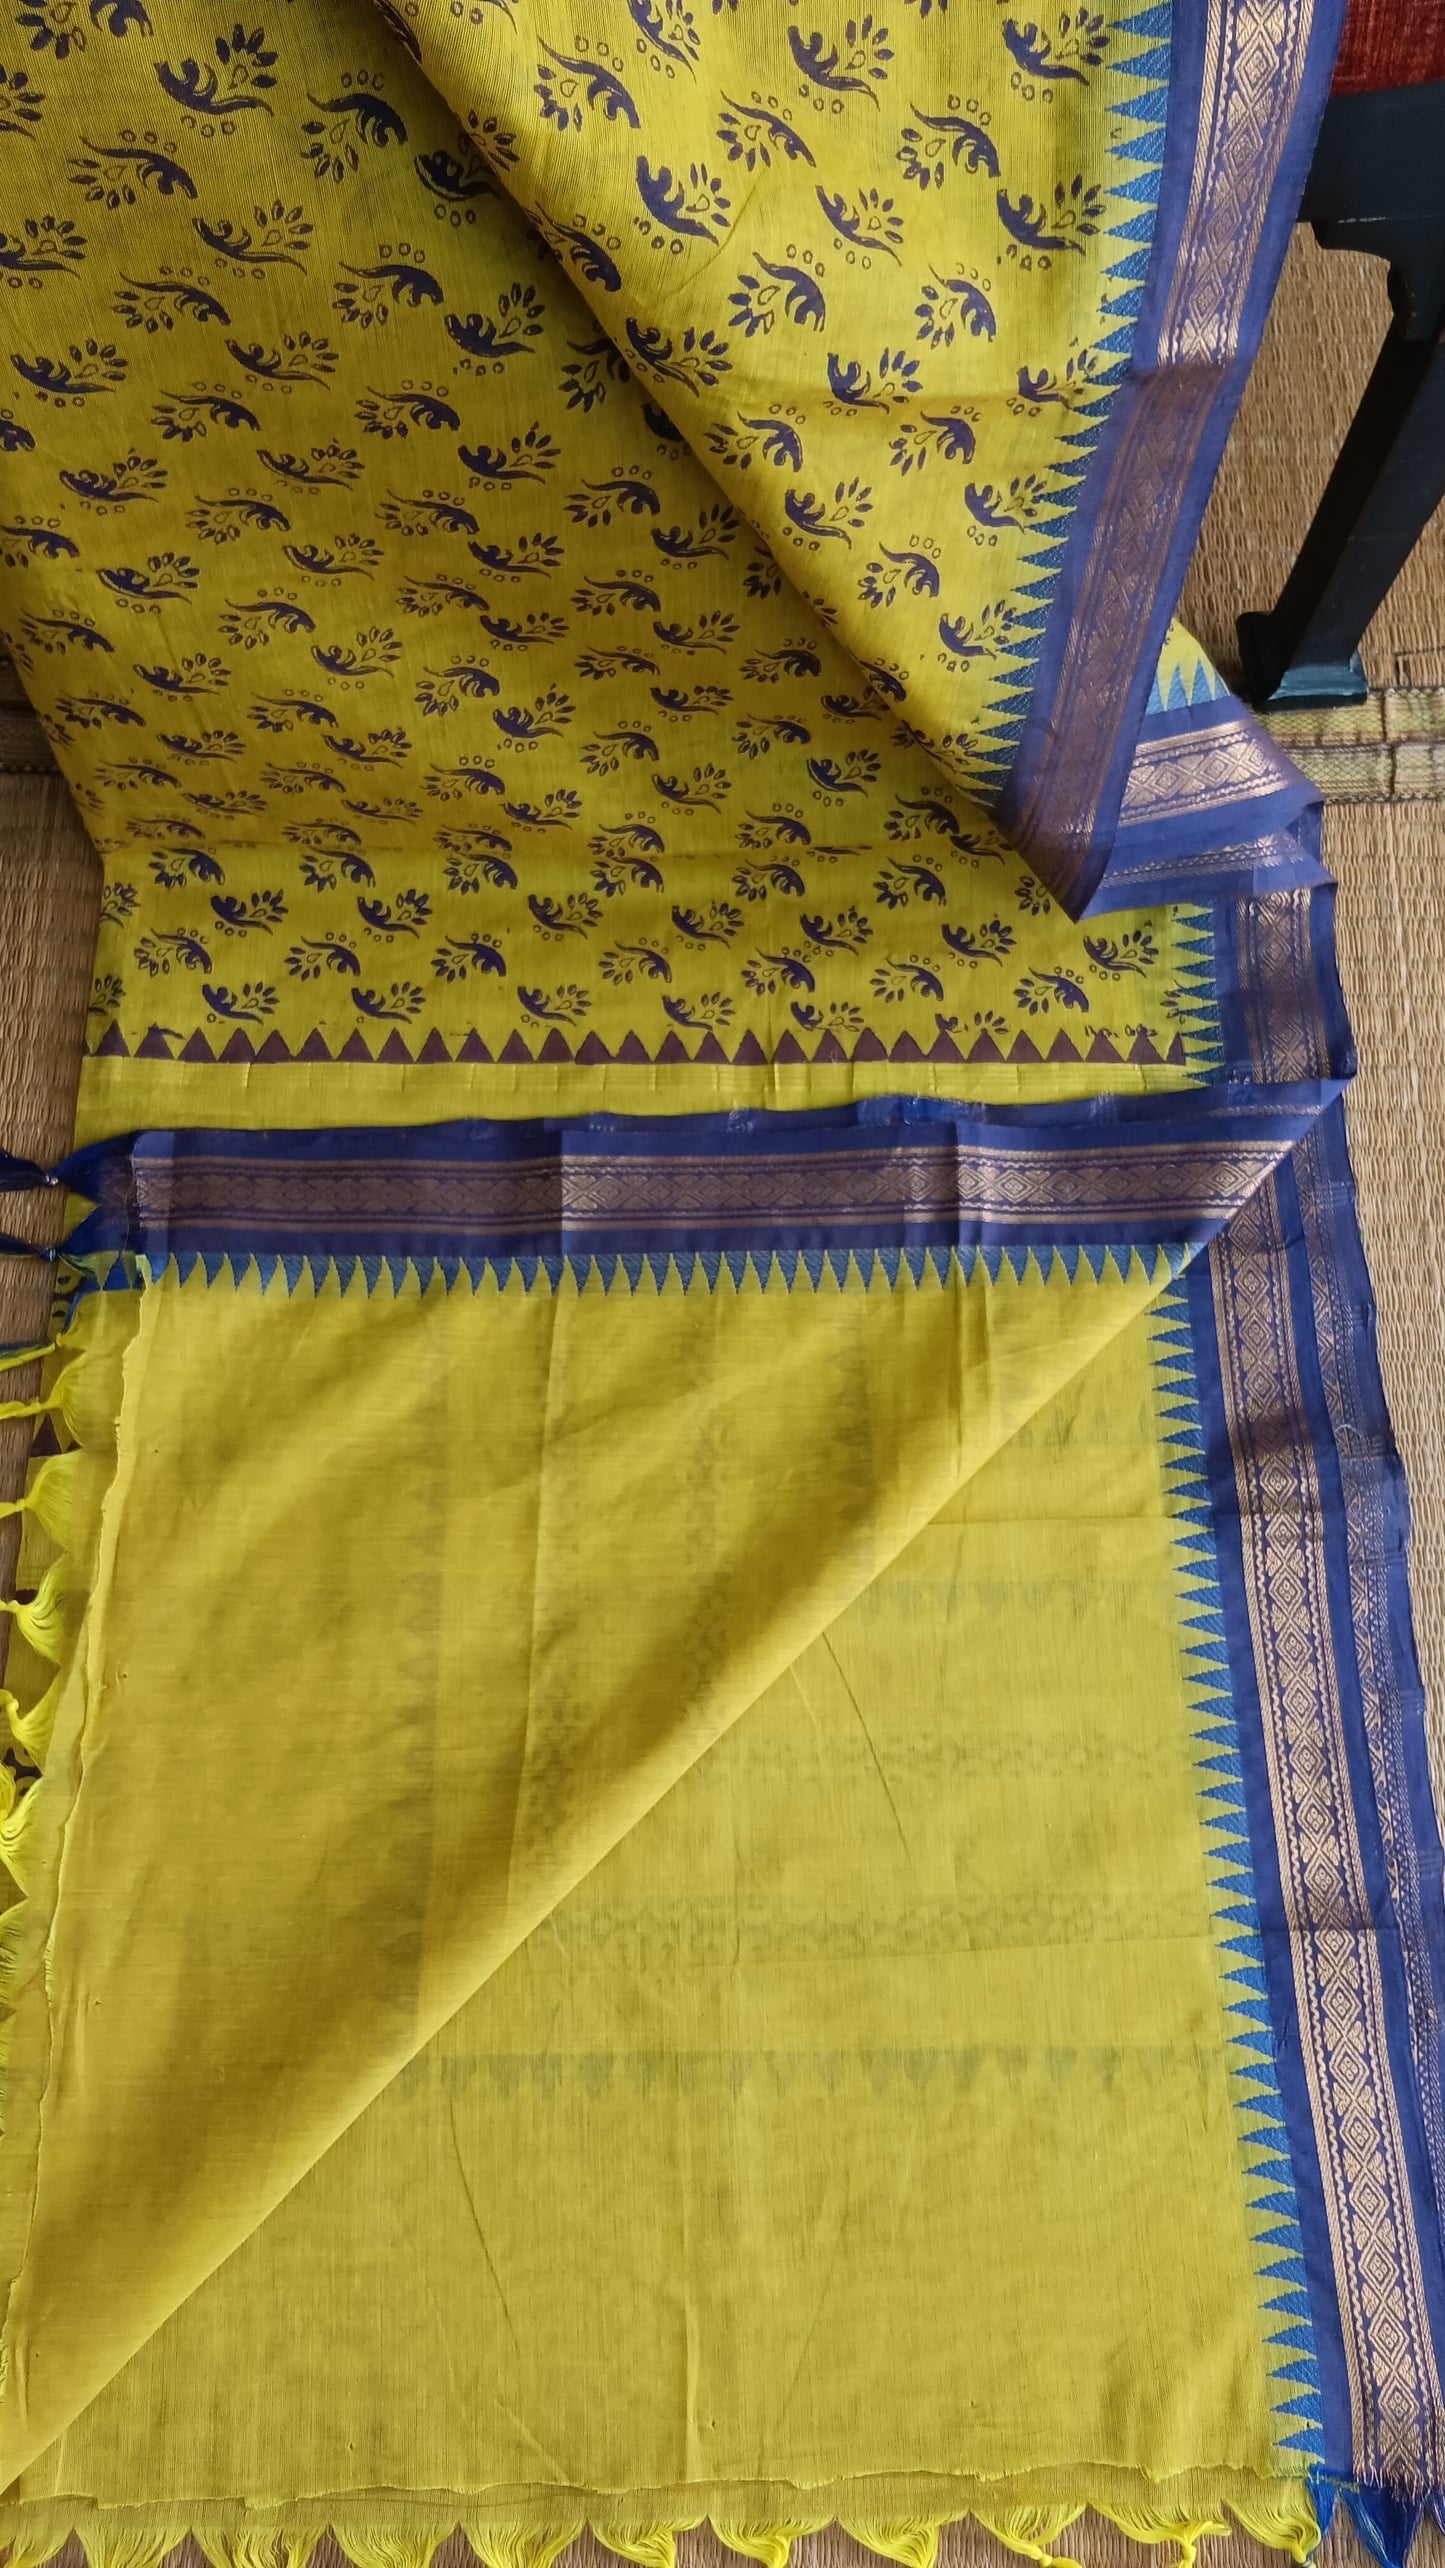 View from the top of the plain yellow blouse of funtion wear cotton saree